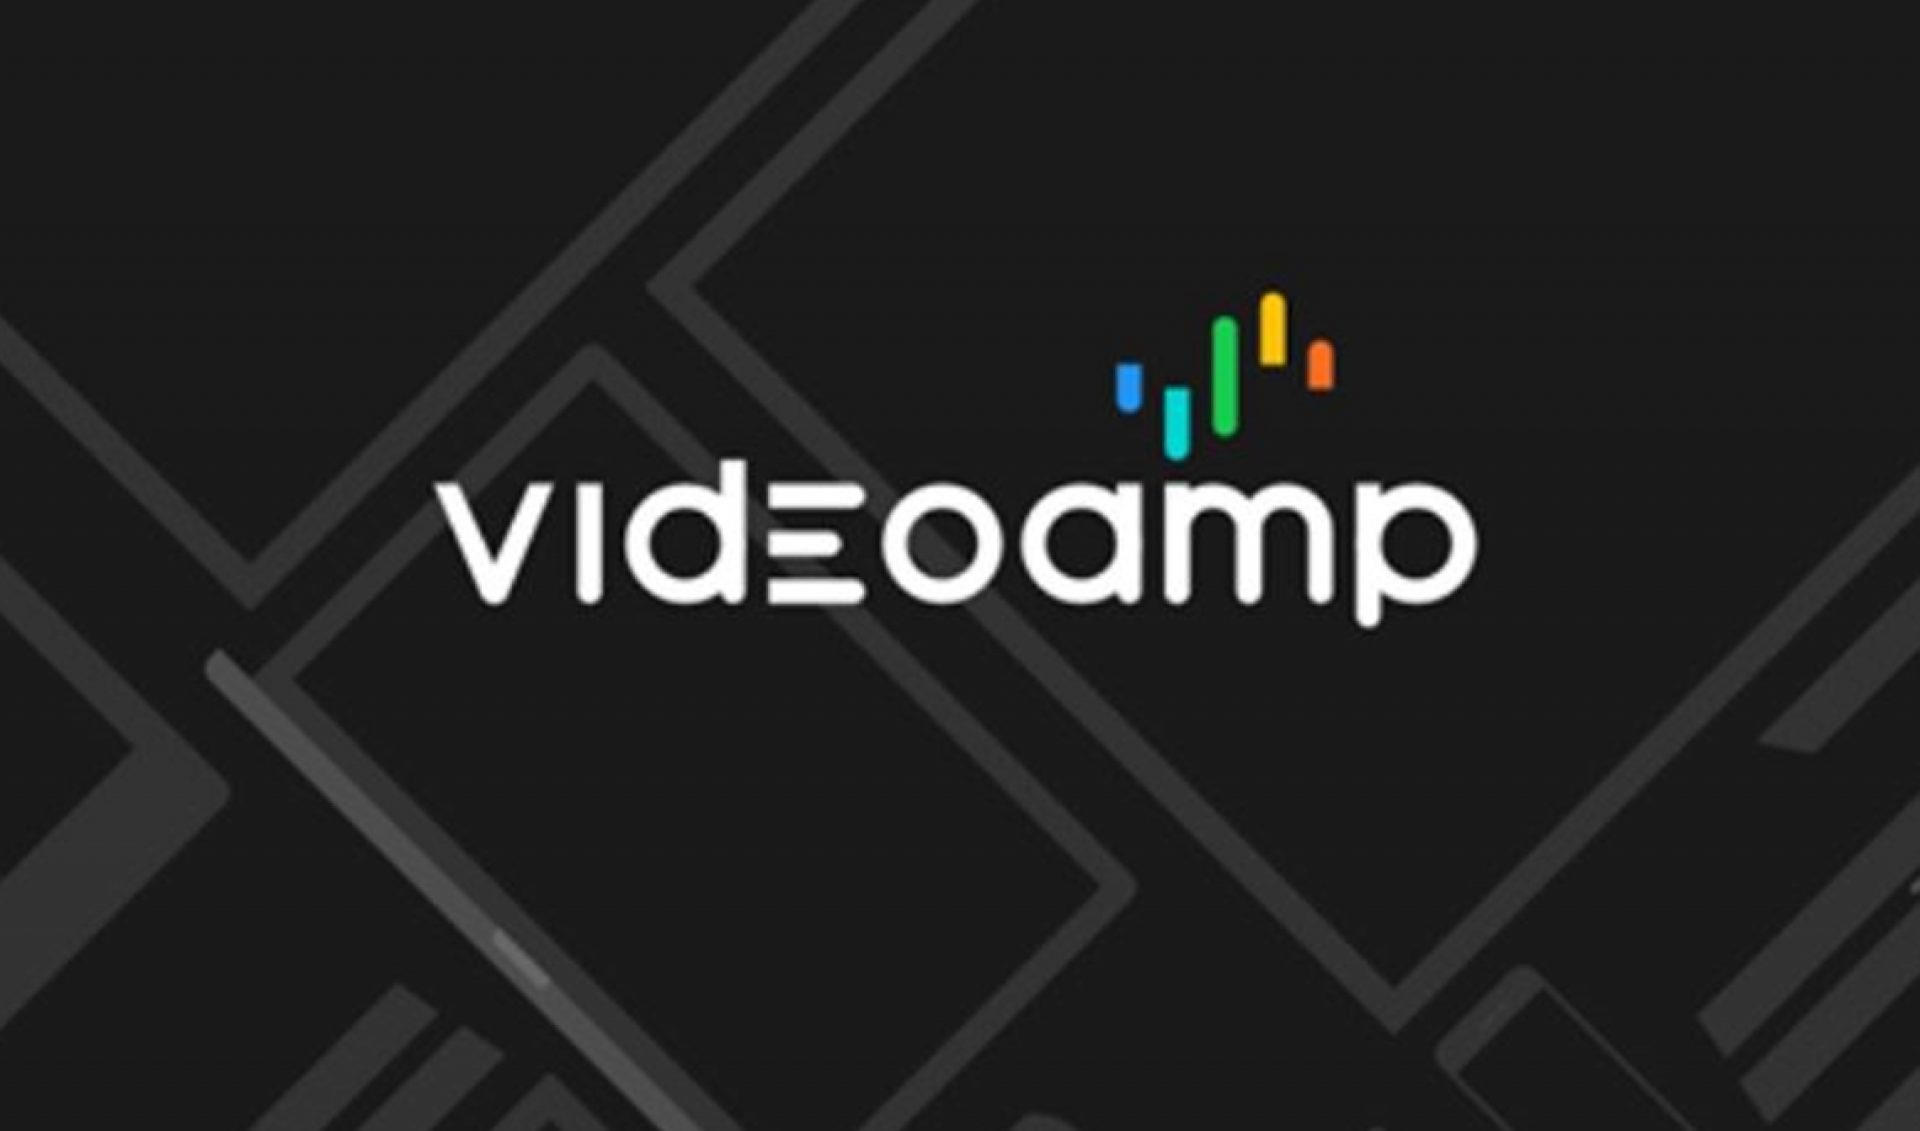 Cross-Screen Ad Software Startup VideoAmp Closes $21.4 Million Funding Round